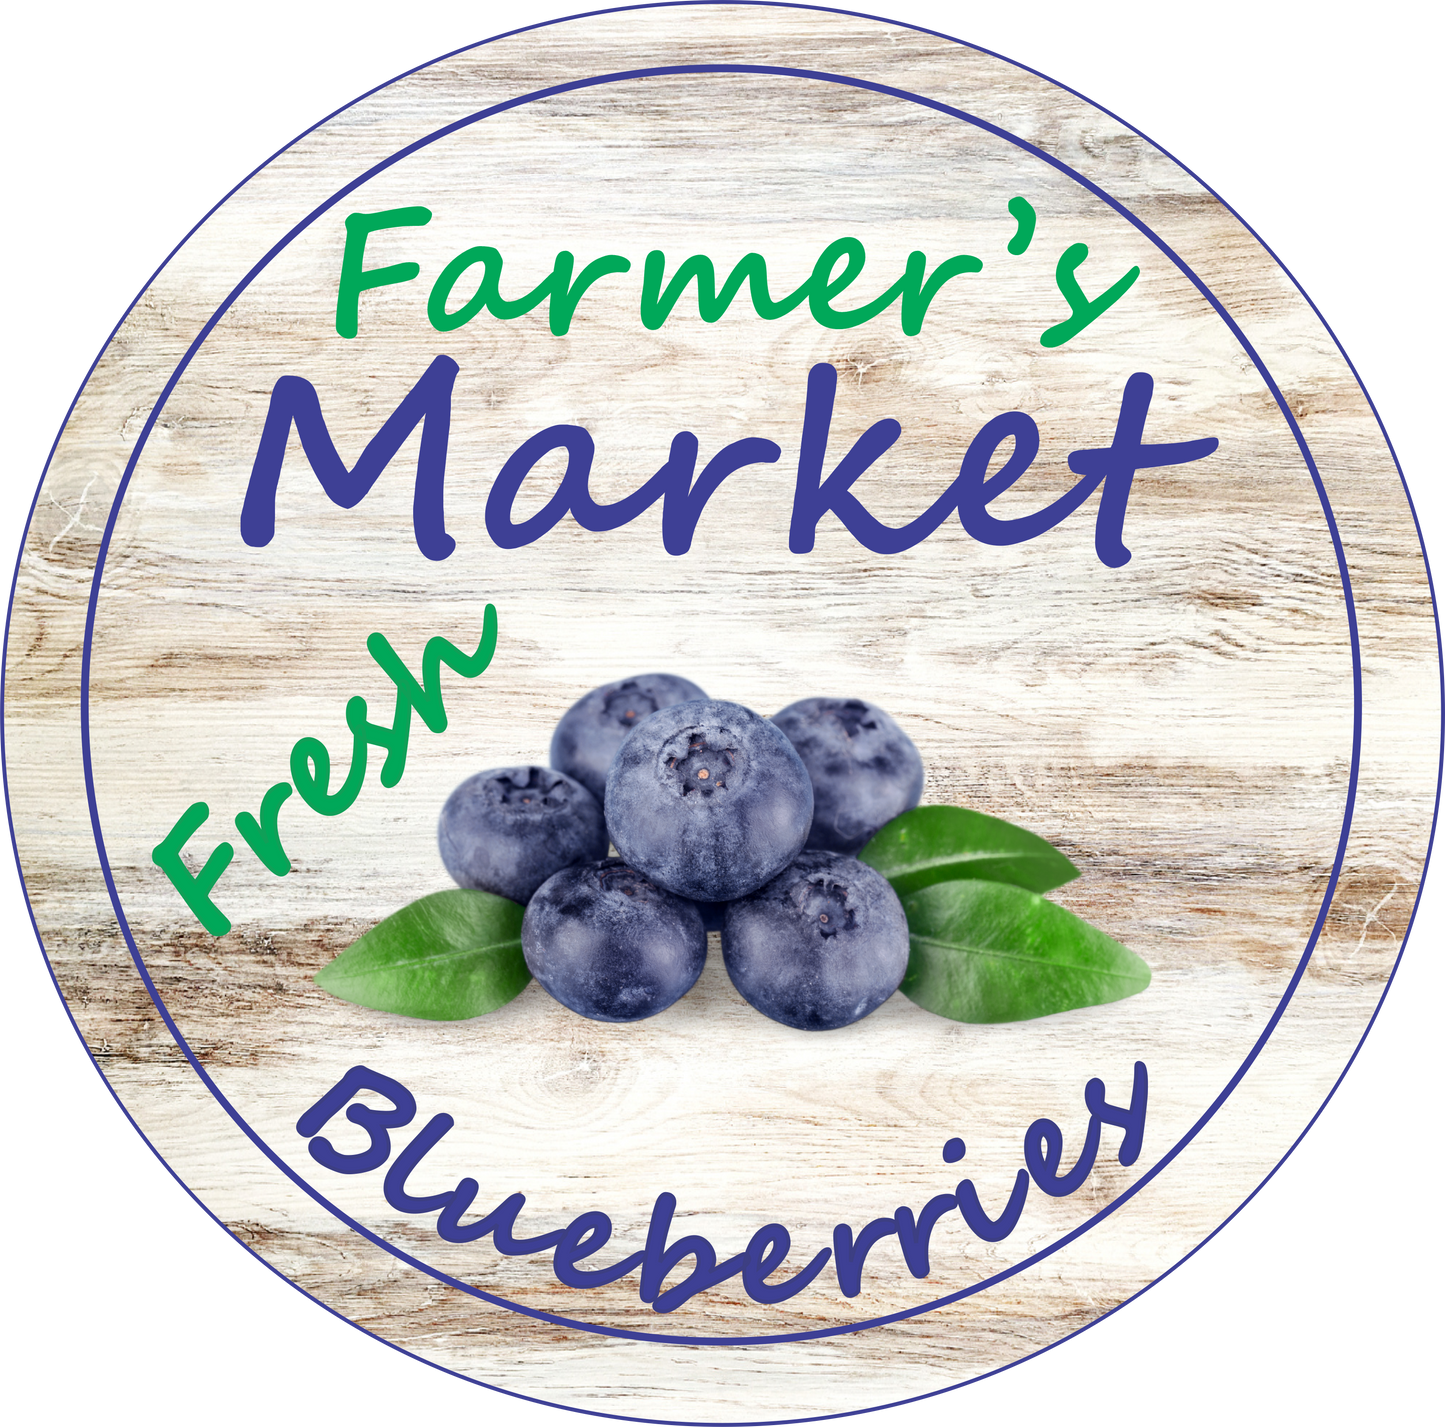 Farmers market blueberries round sign